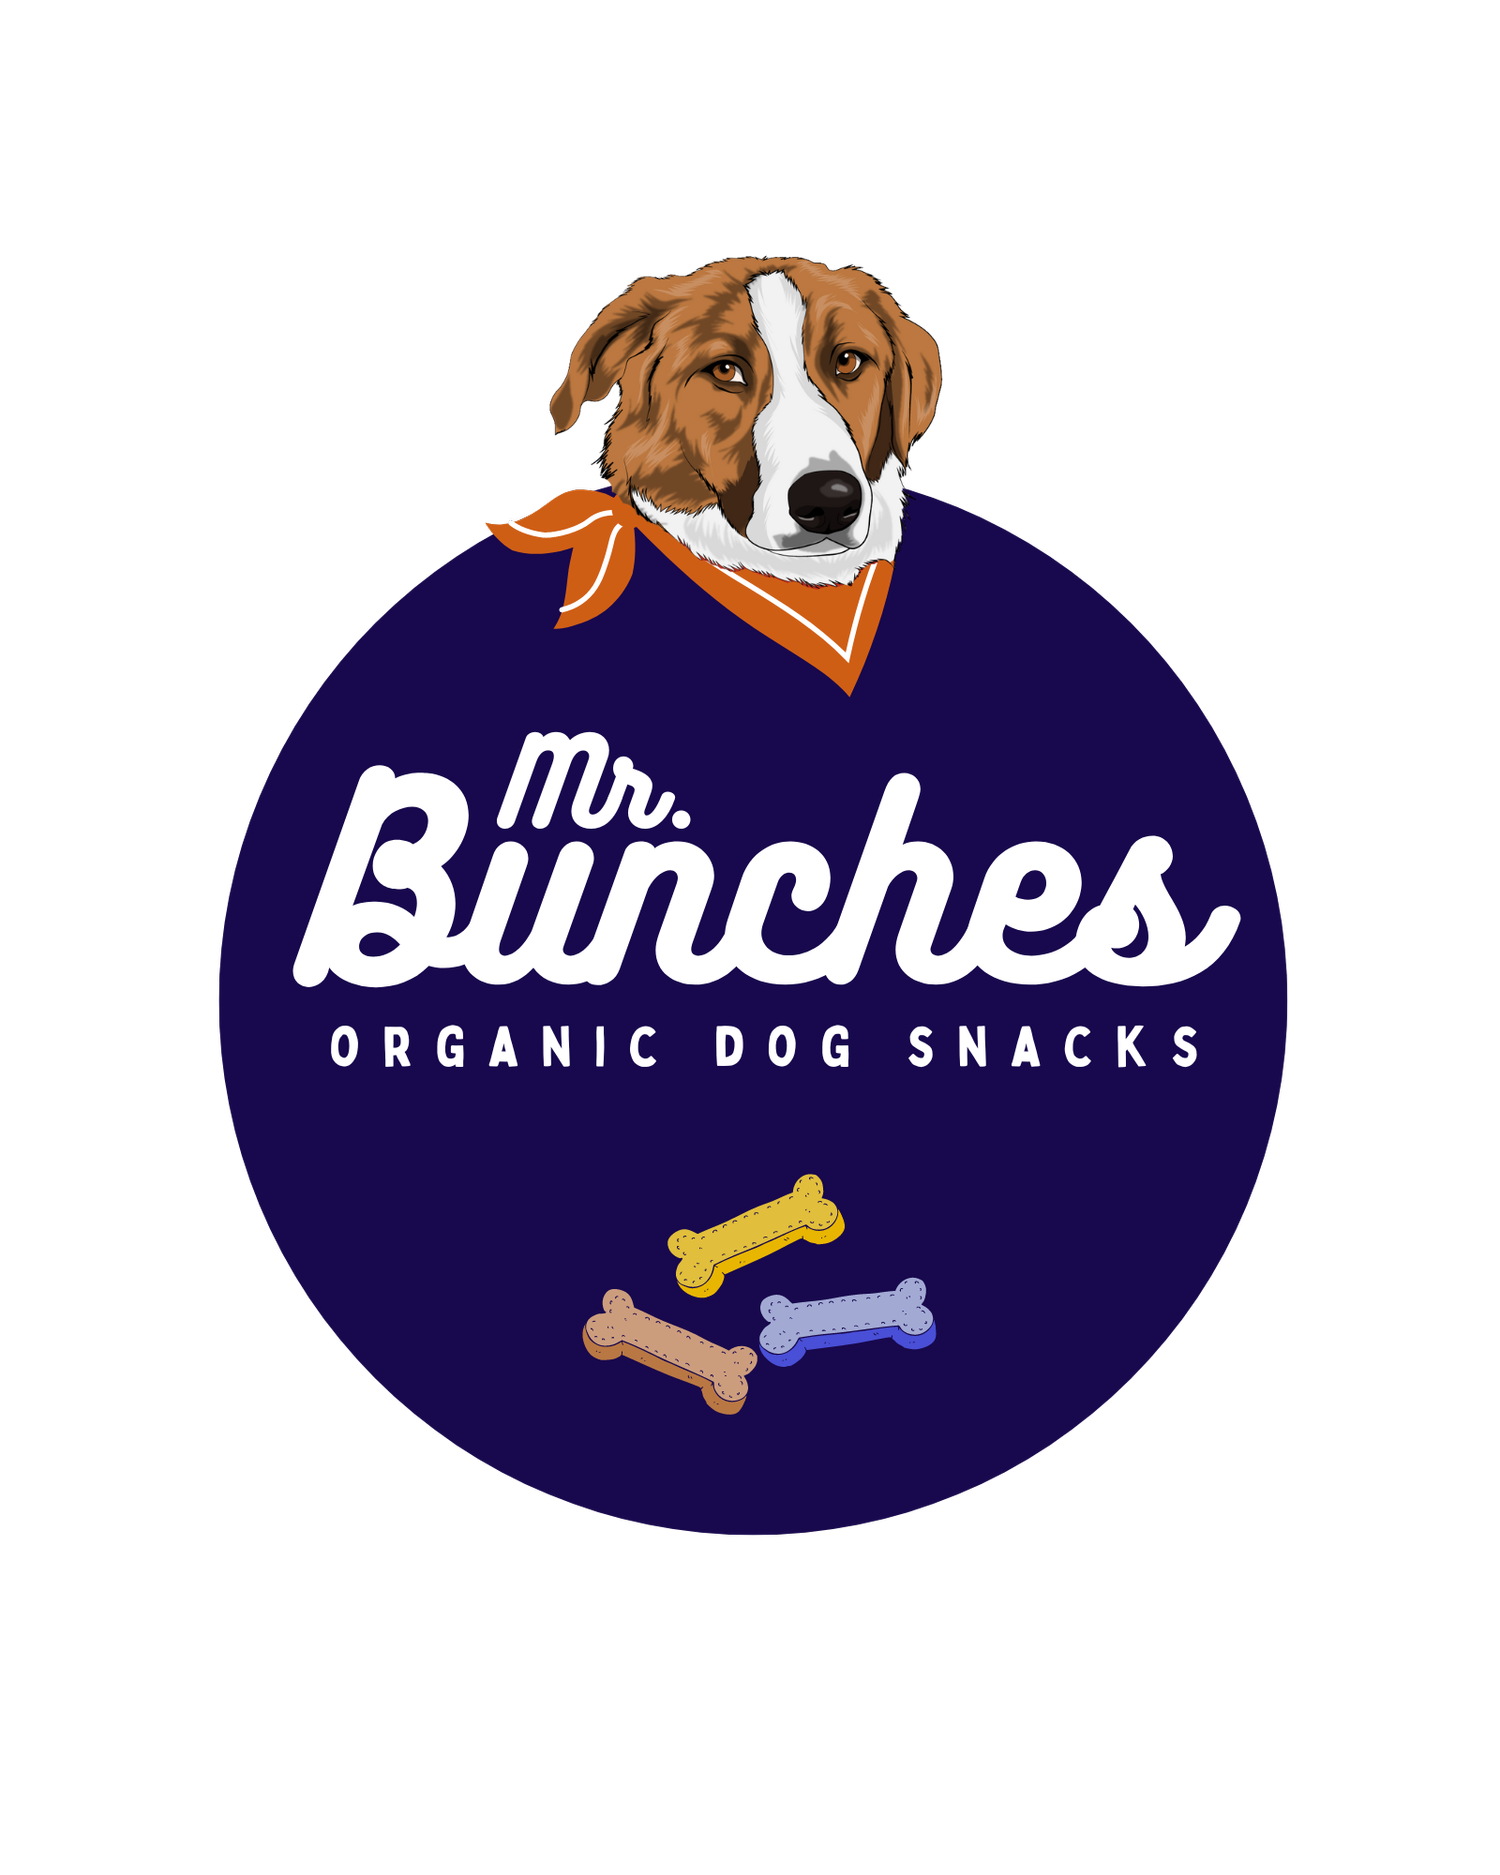 Mr. Bunches Dog Snacks